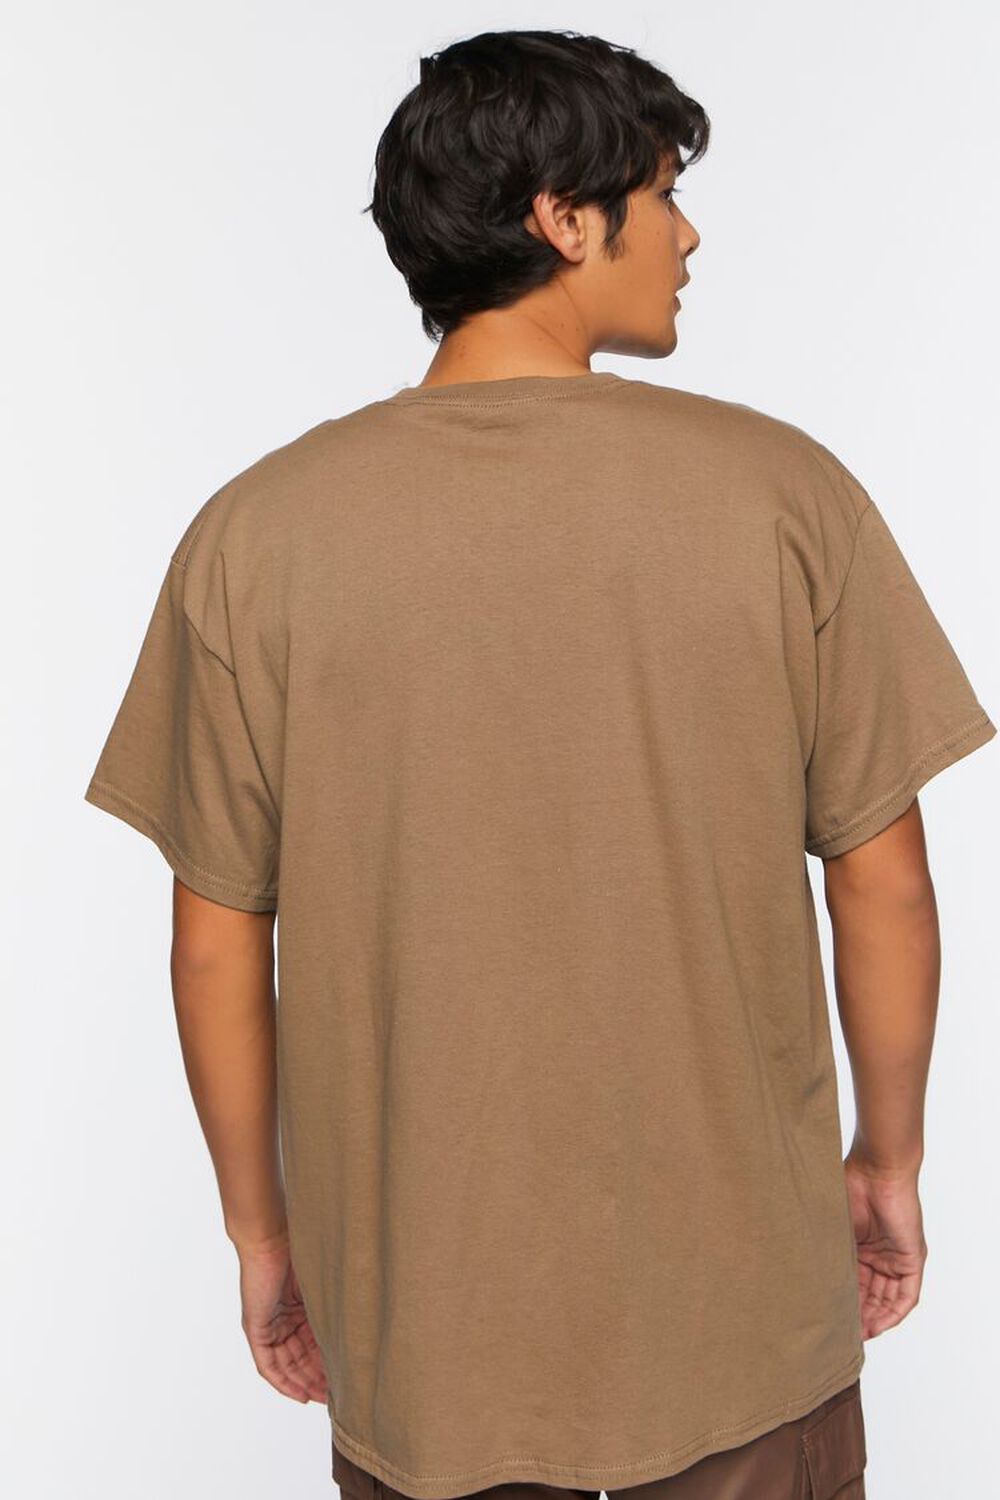 TAUPE/MULTI Ford Bronco Graphic Tee, image 3